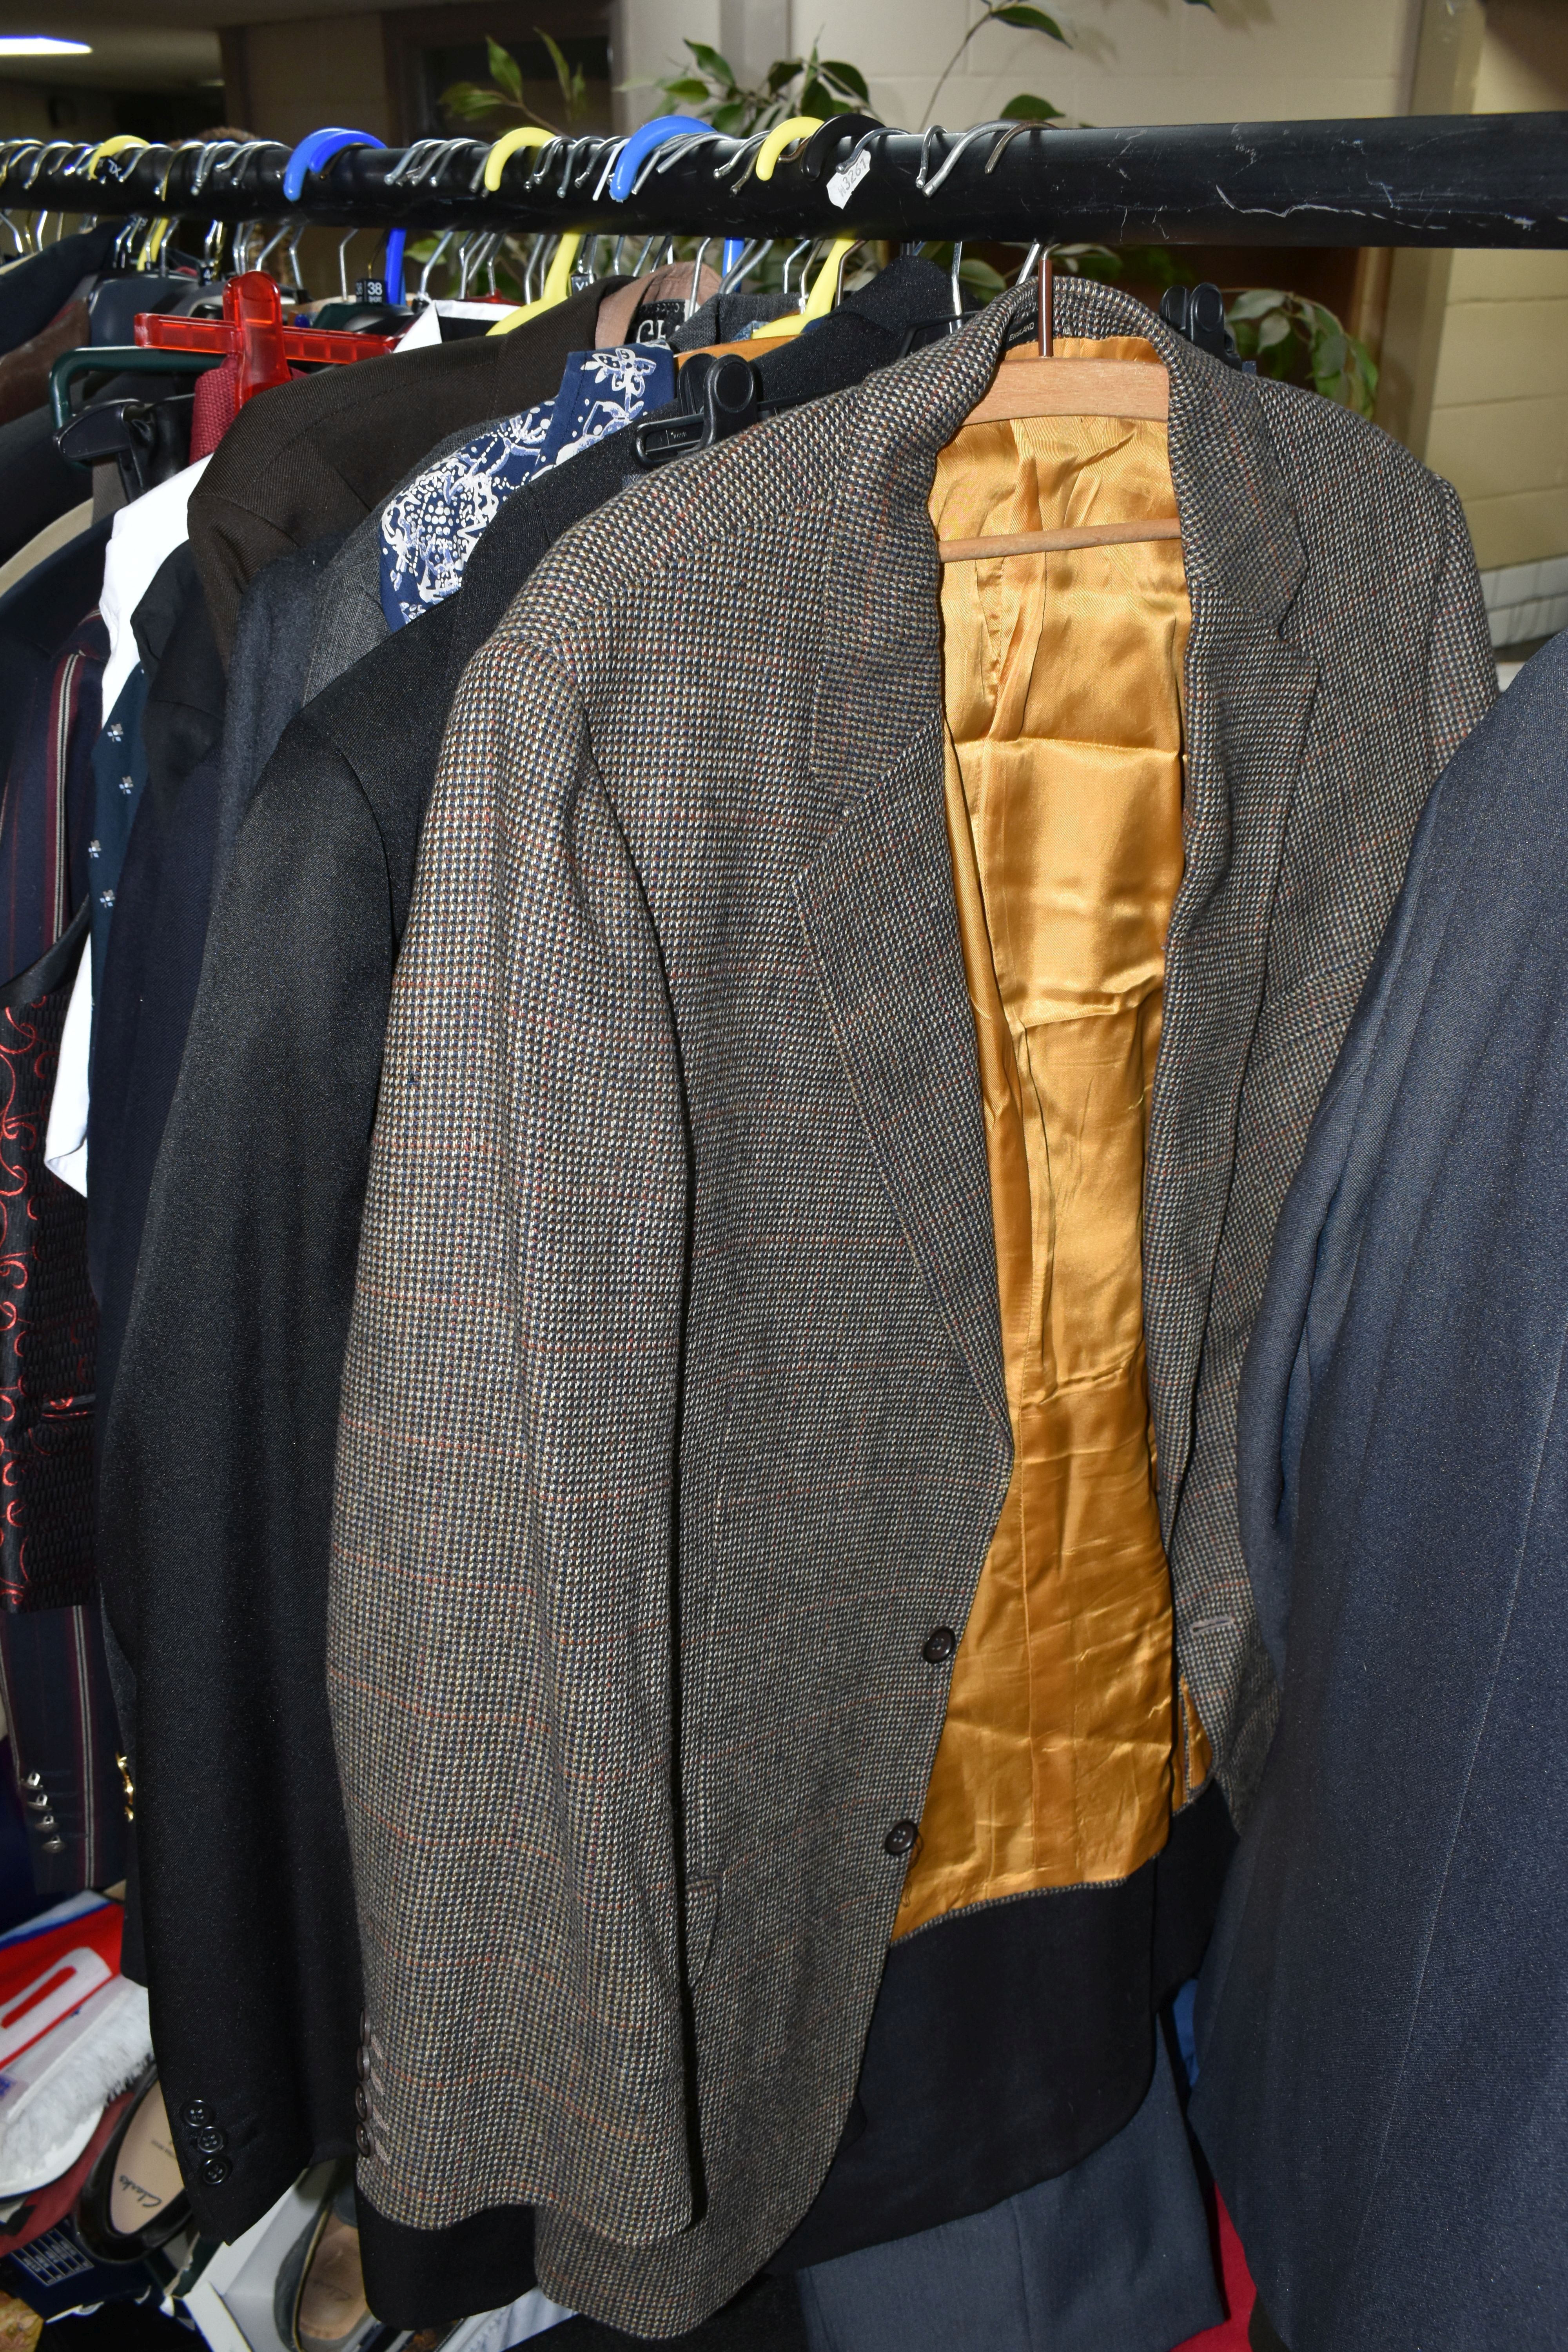 A LARGE QUANTITY OF GENTLEMEN'S CLOTHING AND ACCESSORIES, to include eight suits, rain jackets, - Image 8 of 19